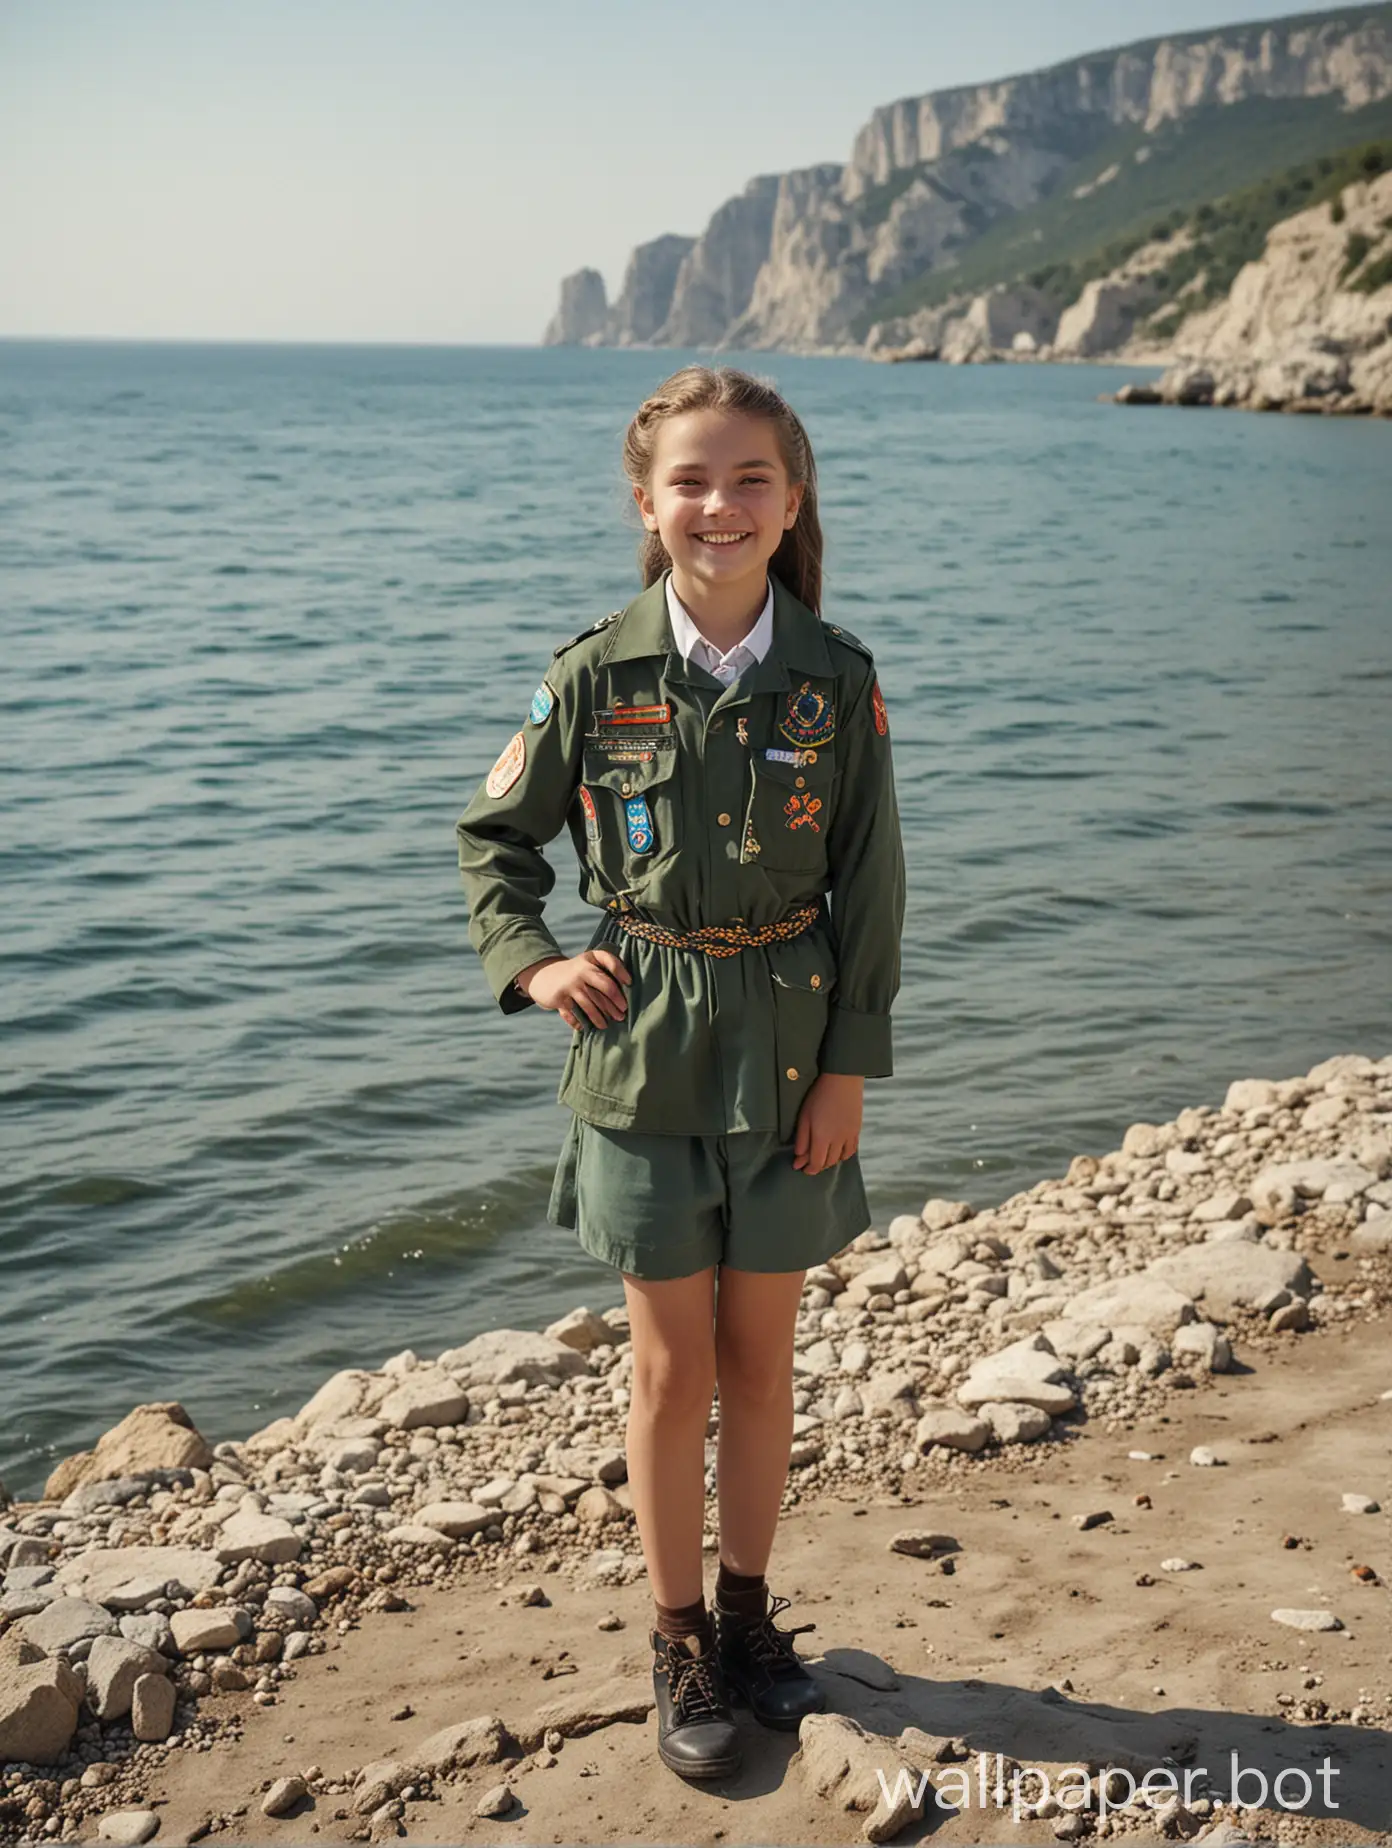 Scenic-View-of-the-Crimea-Sea-with-Smiling-11YearOld-Girl-Scout